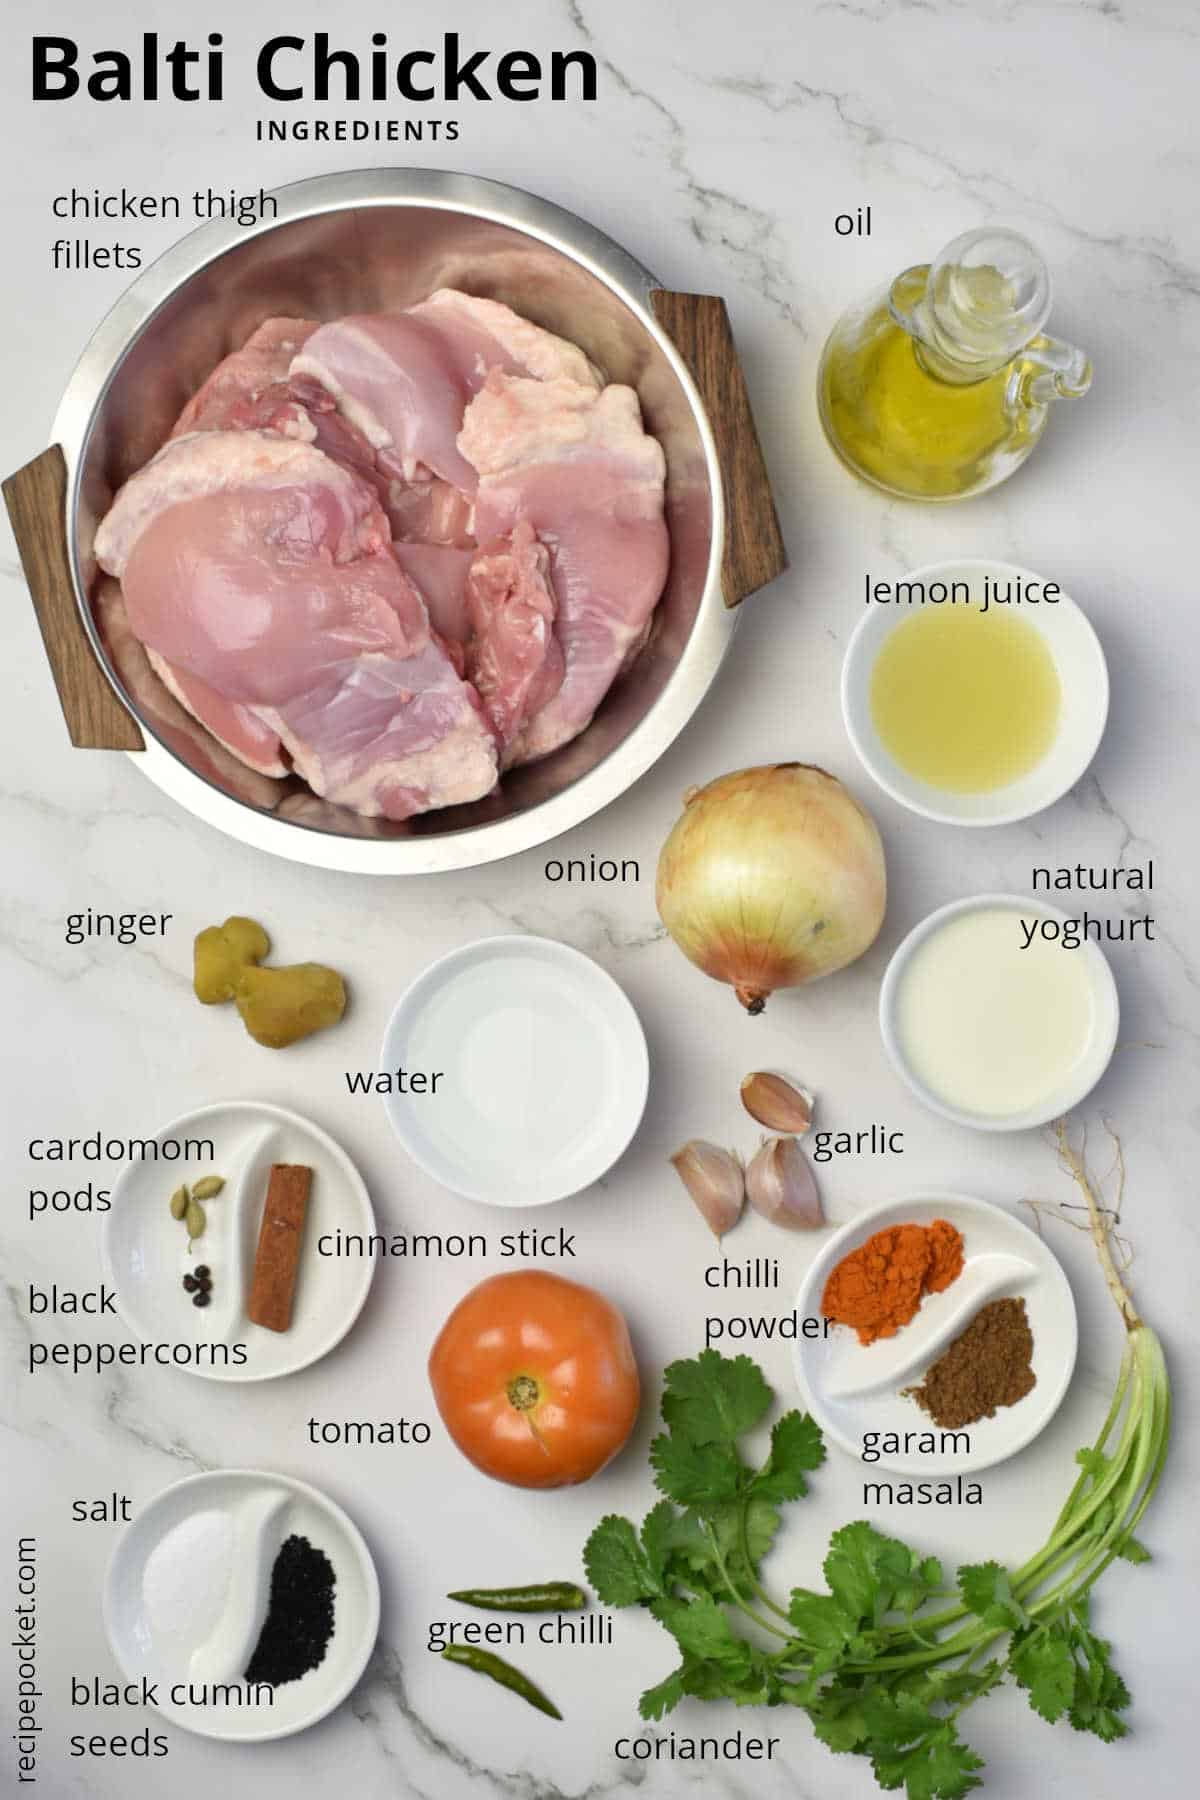 Image showing the ingredients needed to make Balti chicken curry.